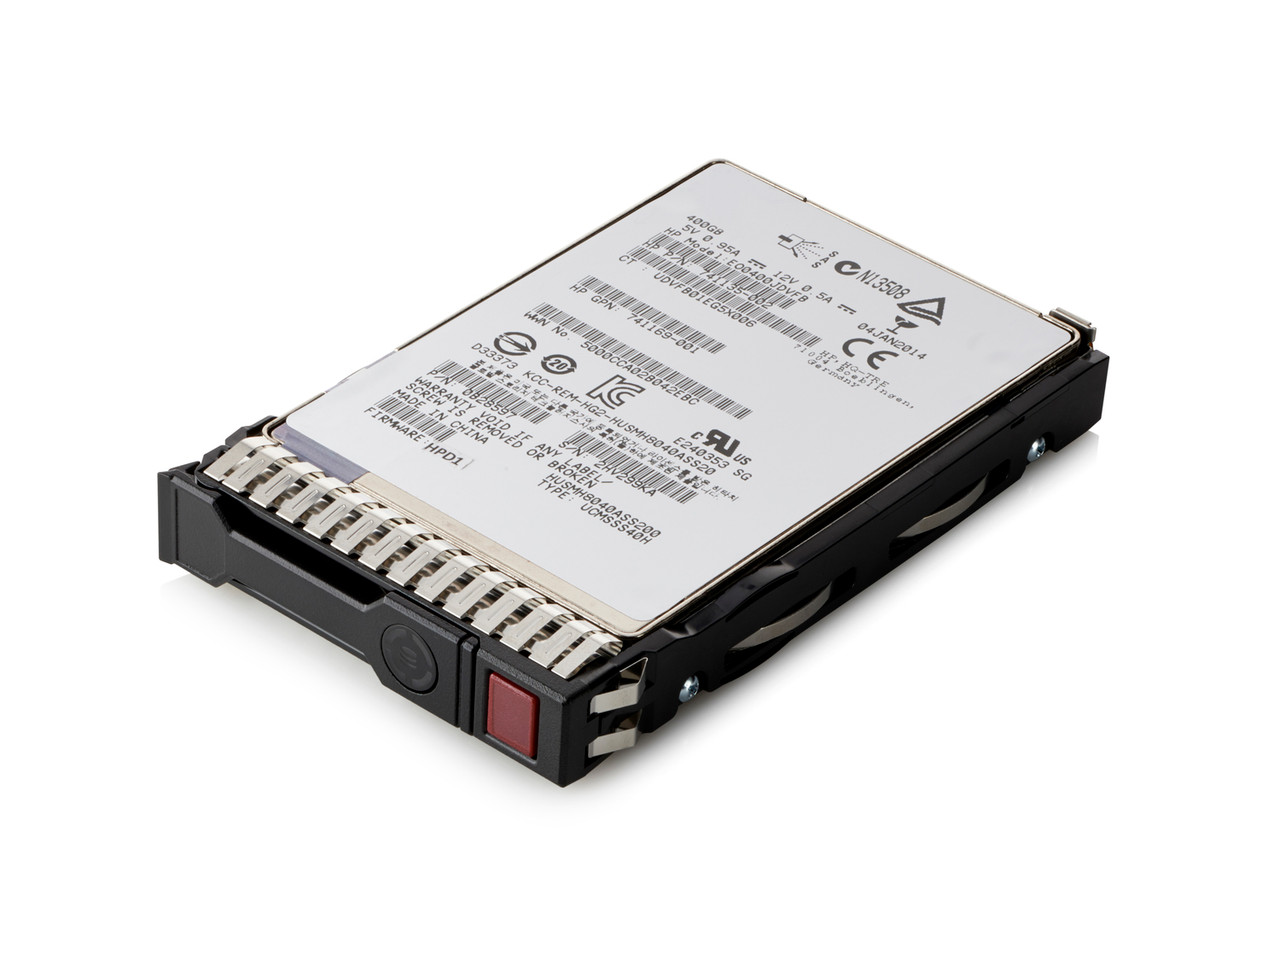 P05928-B21 - HPE 480GB SATA 6G Read Intensive SFF (2.5in) SC 3yr Wty Digitally Signed Firmware SSD